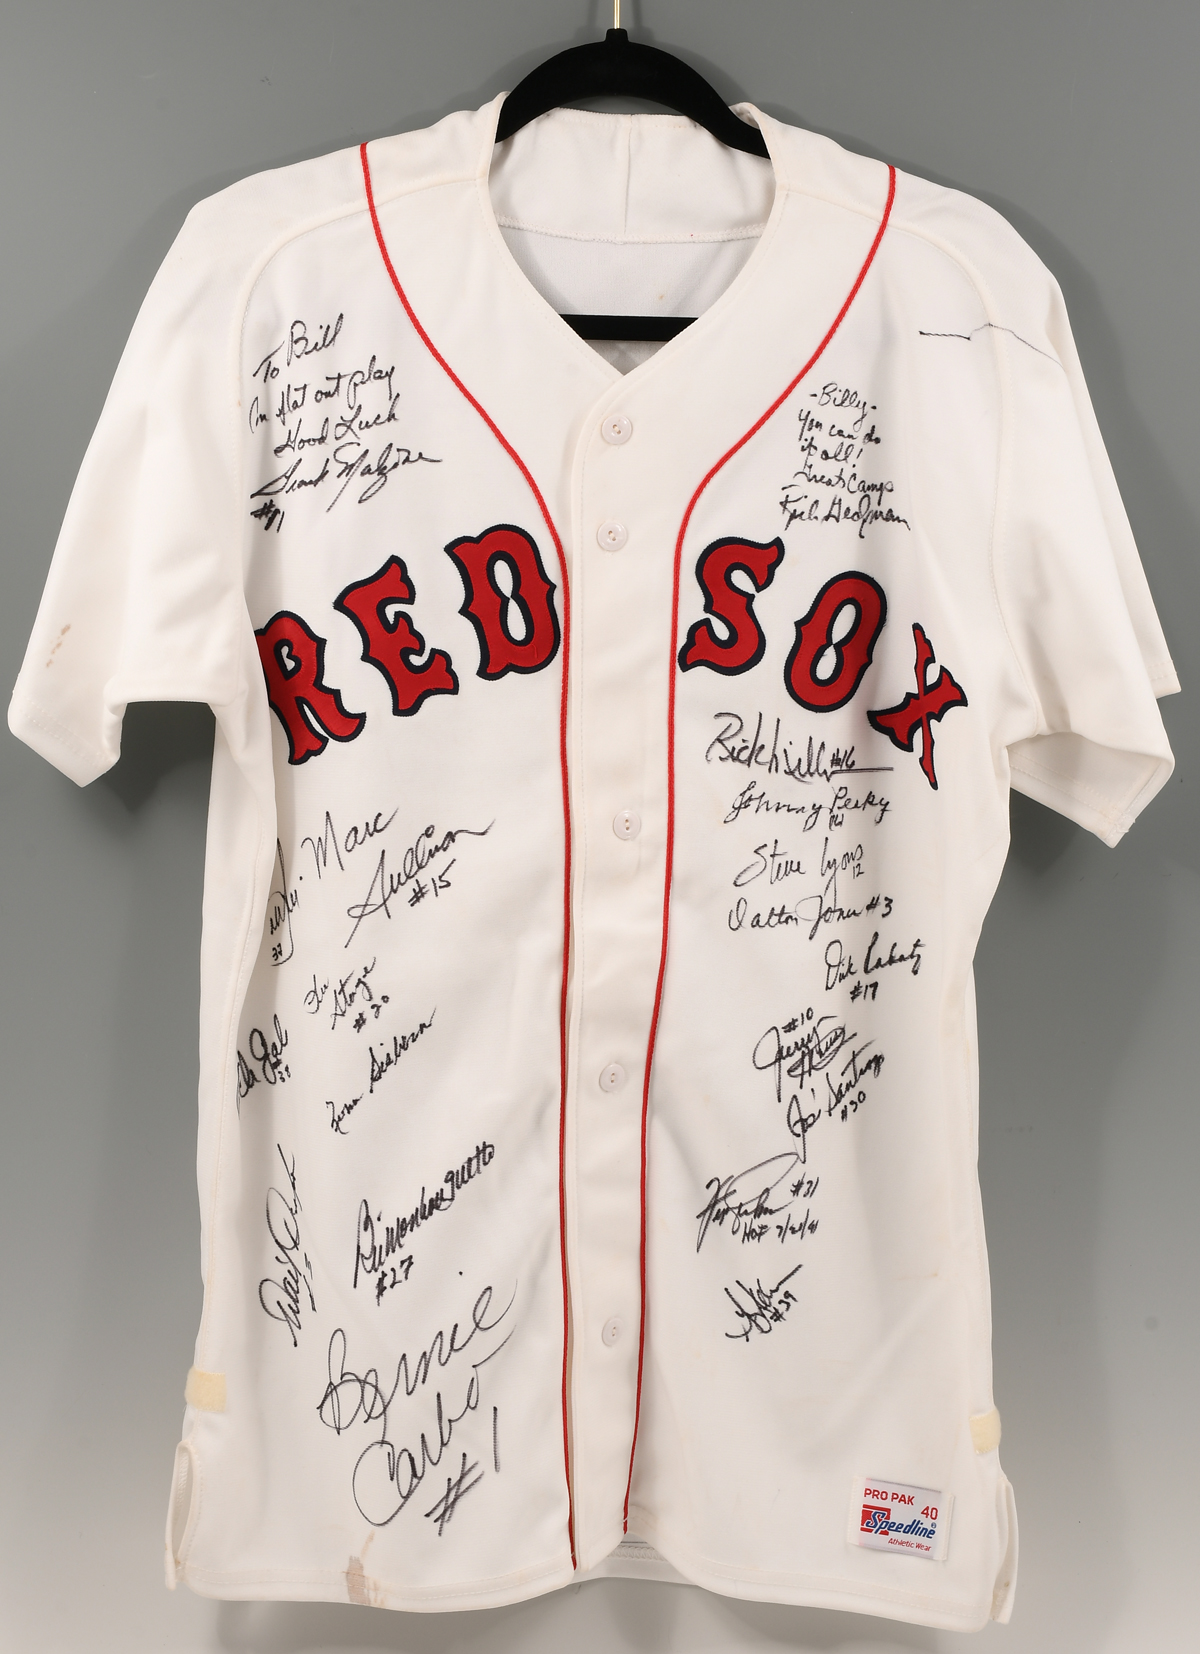 BOSTON RED SOX SIGNED TEAM JERSEY: